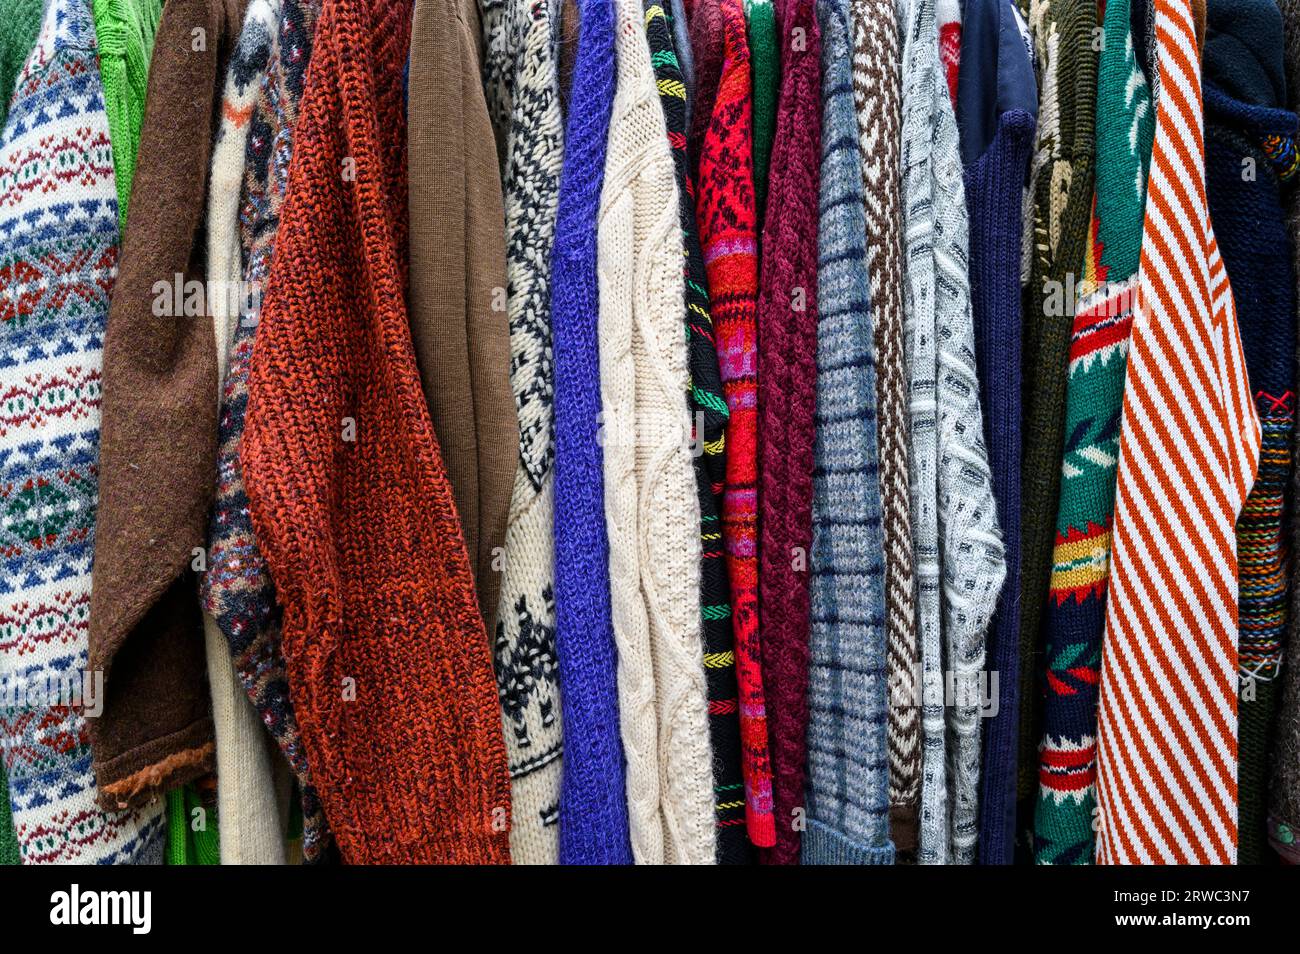 Sweaters for sale in a thrift shop Stock Photo